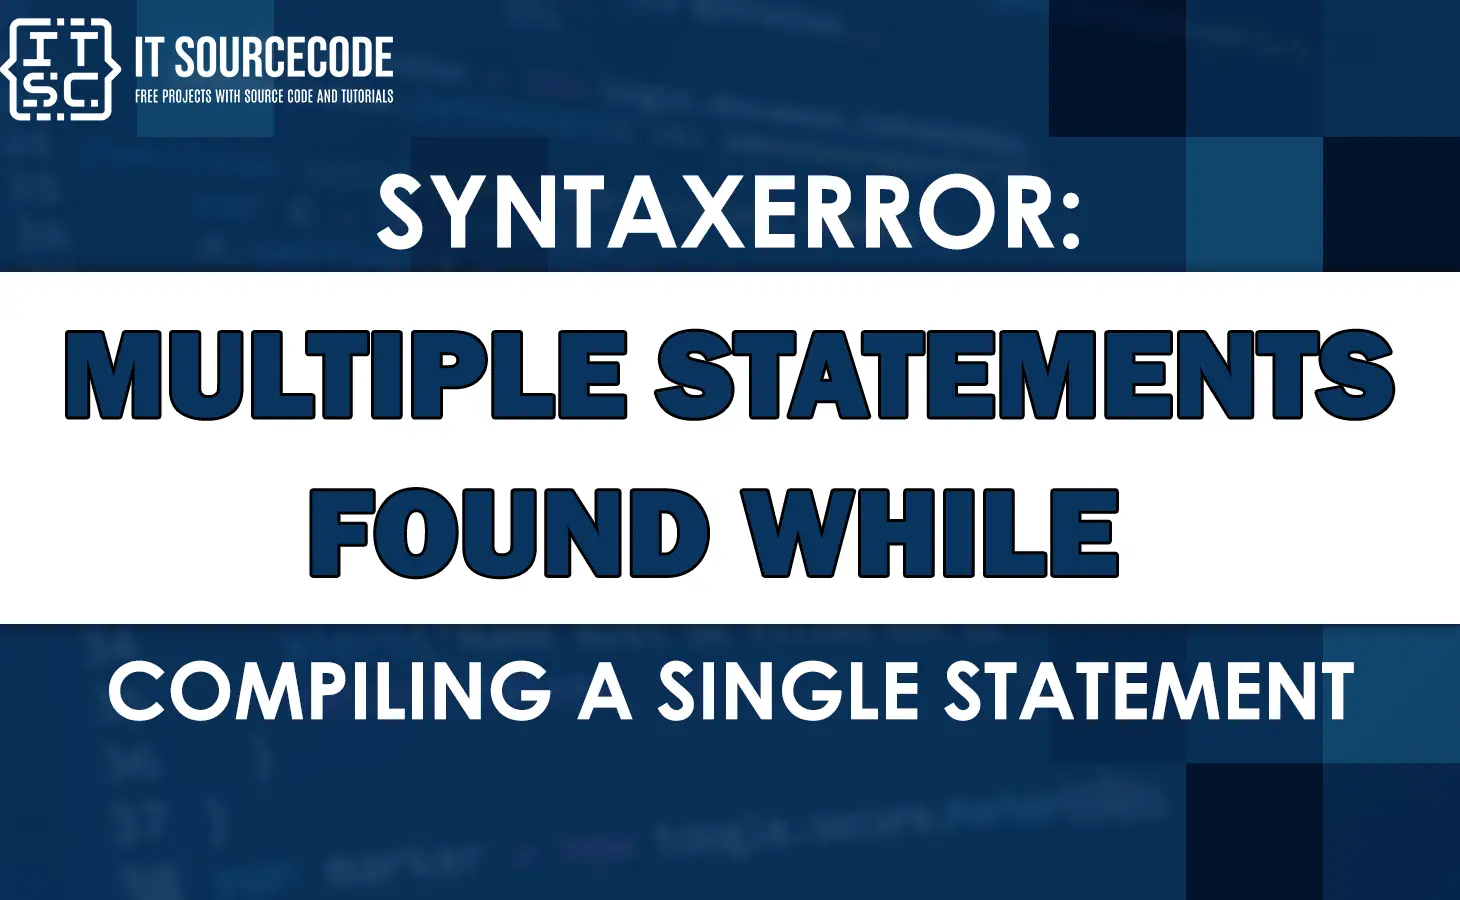 syntaxerror: multiple statements found while compiling a single statement